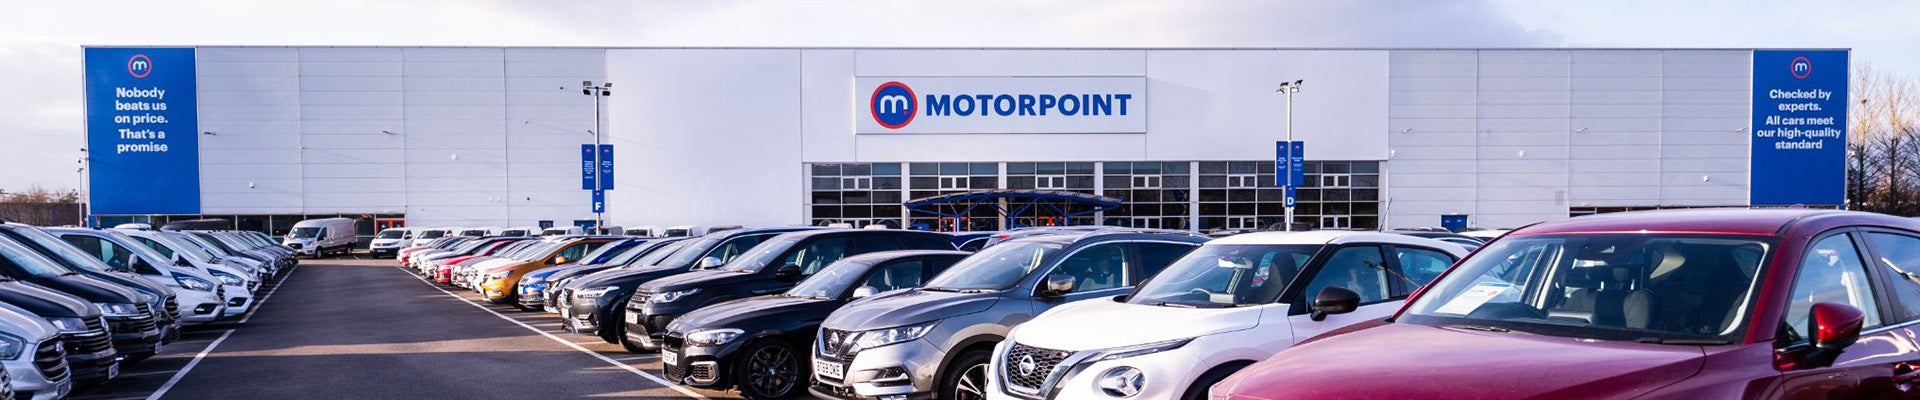 Used cars at Motorpoint Sheffield